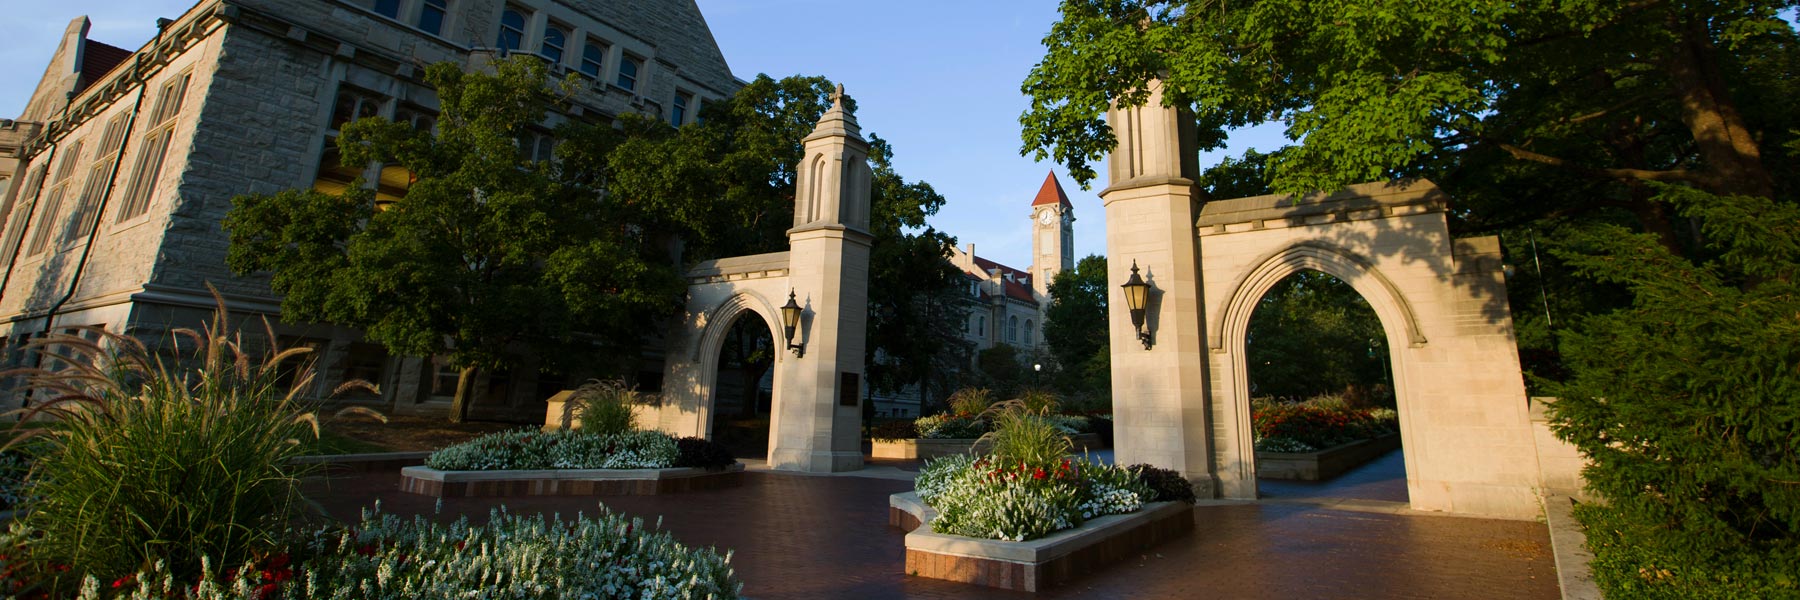 The Sample Gates on a summer evening